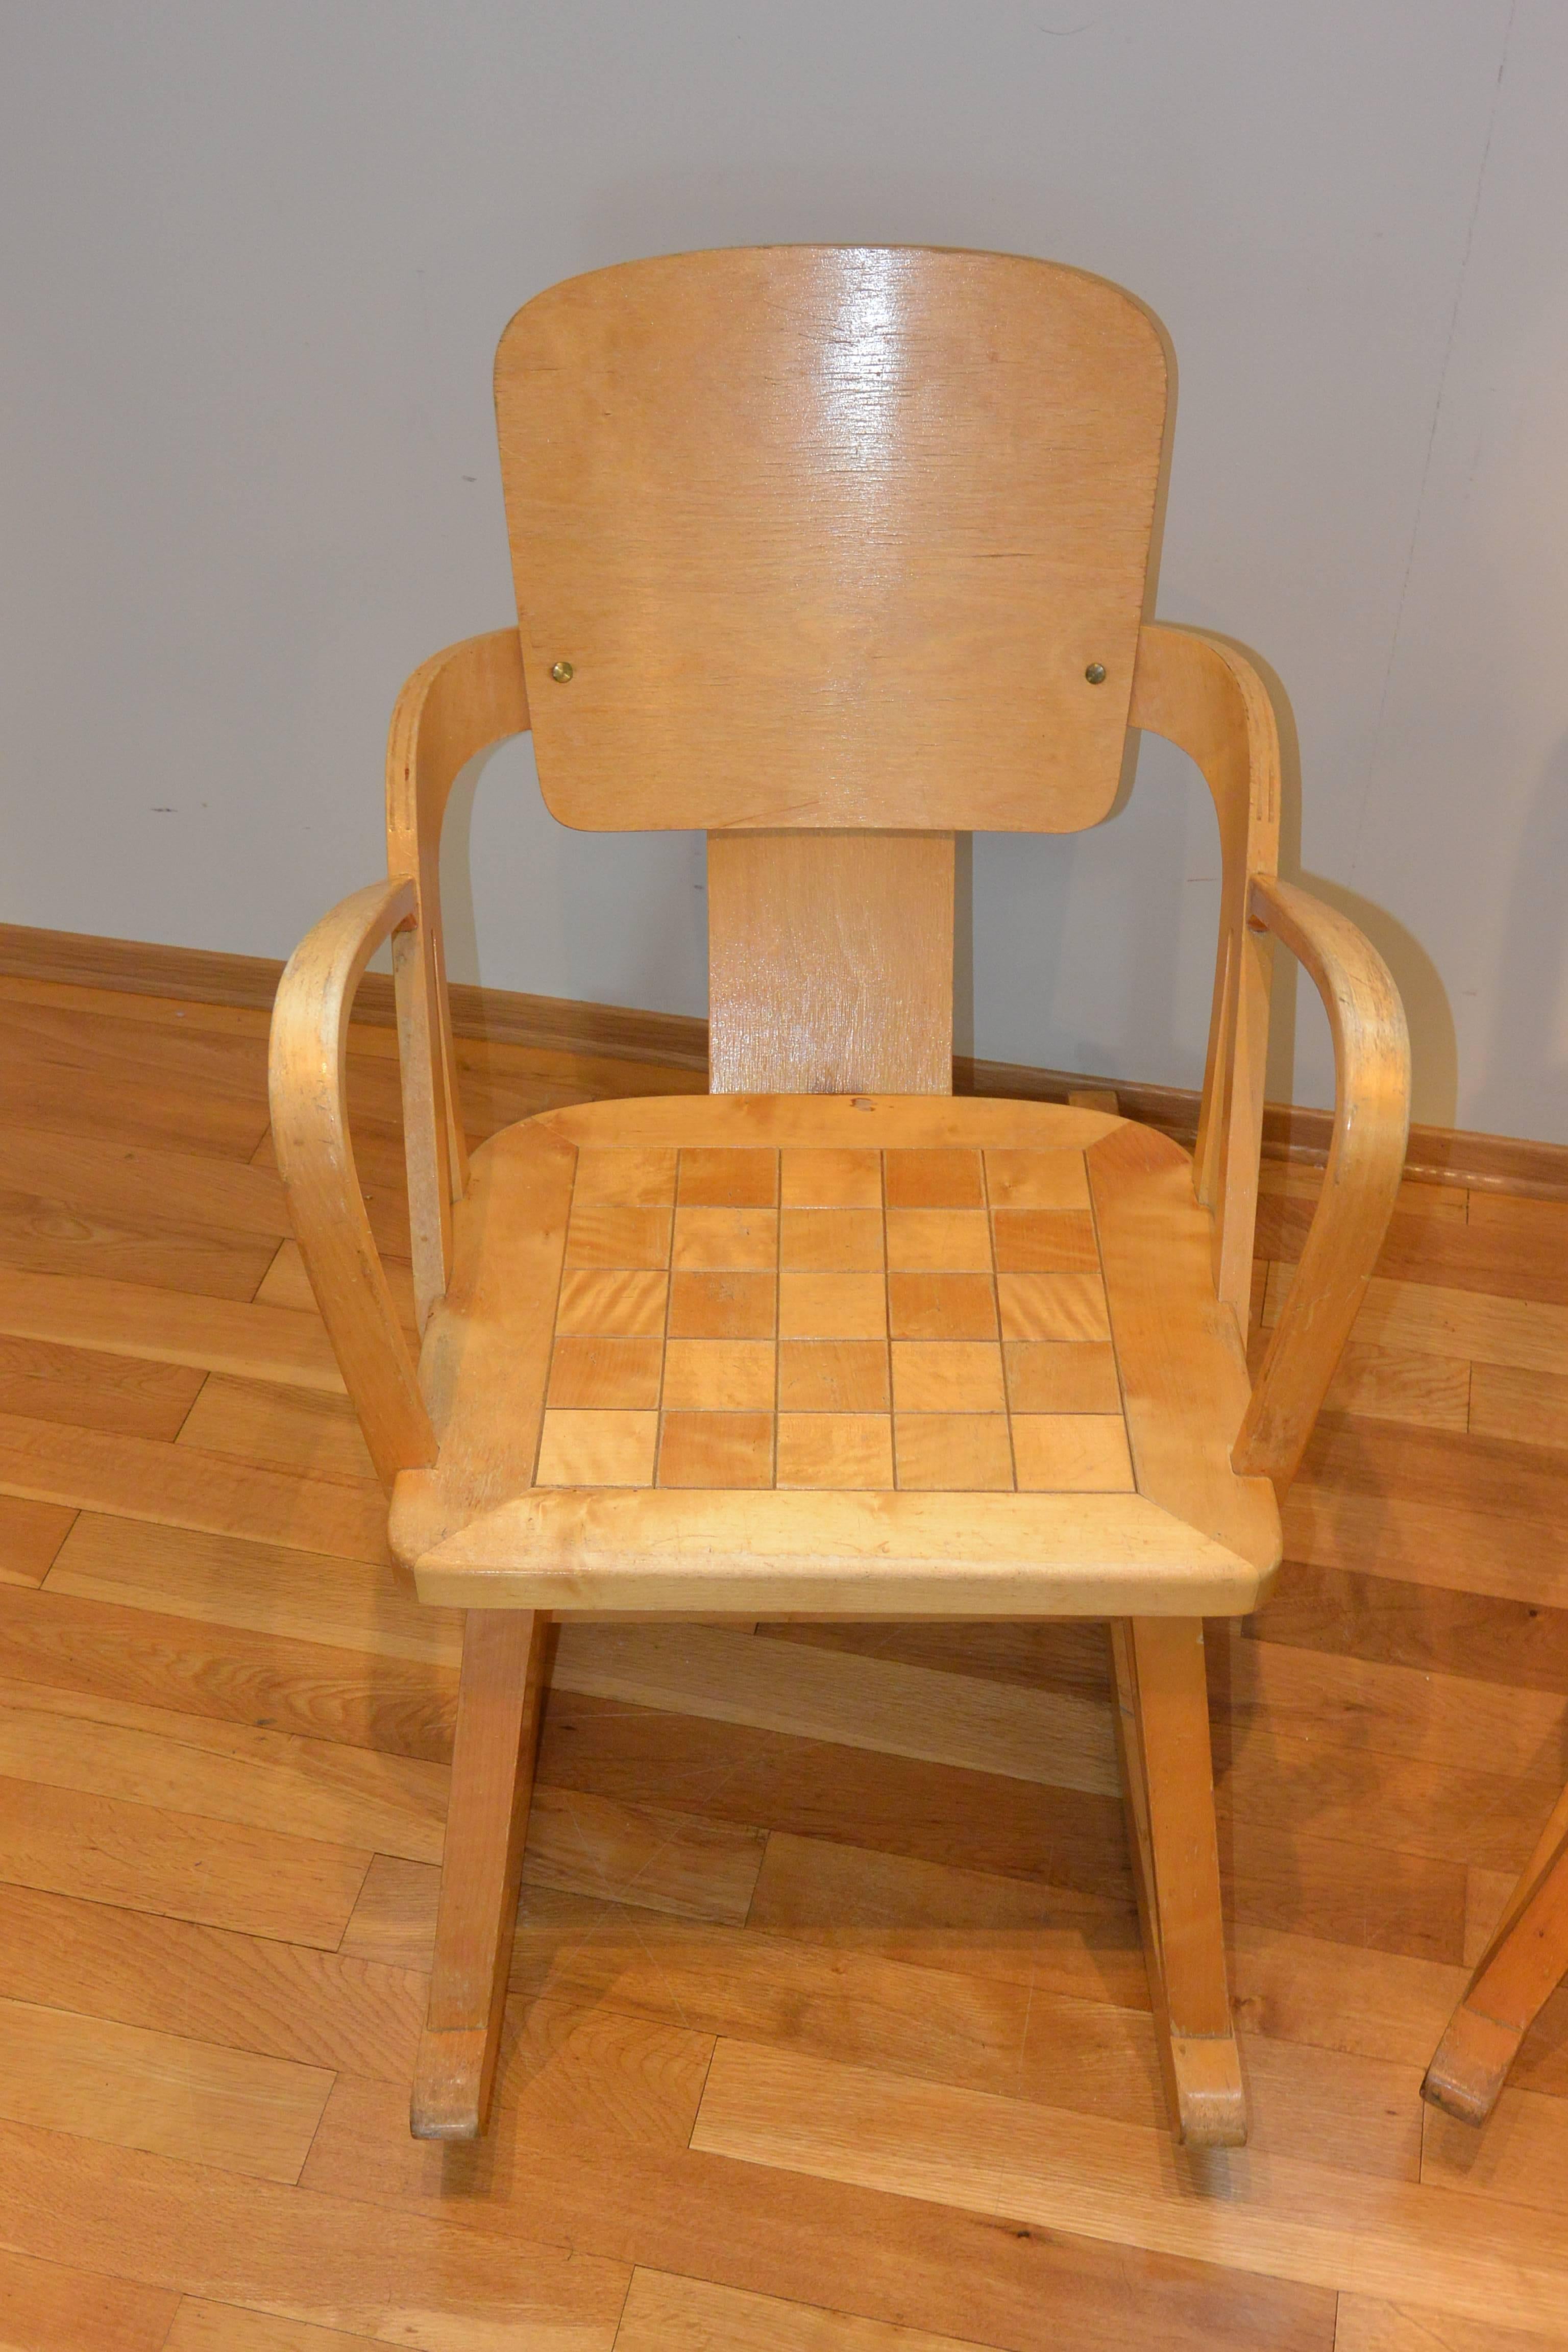 Rocking chair pair designed by Per Aaslid and manufactured by Aaslid Stolefabrik, Norway, also known as Aaslid-Stolen. Created from the 1940s through to the 1950s and made from beechwood.

The Norwegian designed and made rocking chairs have a